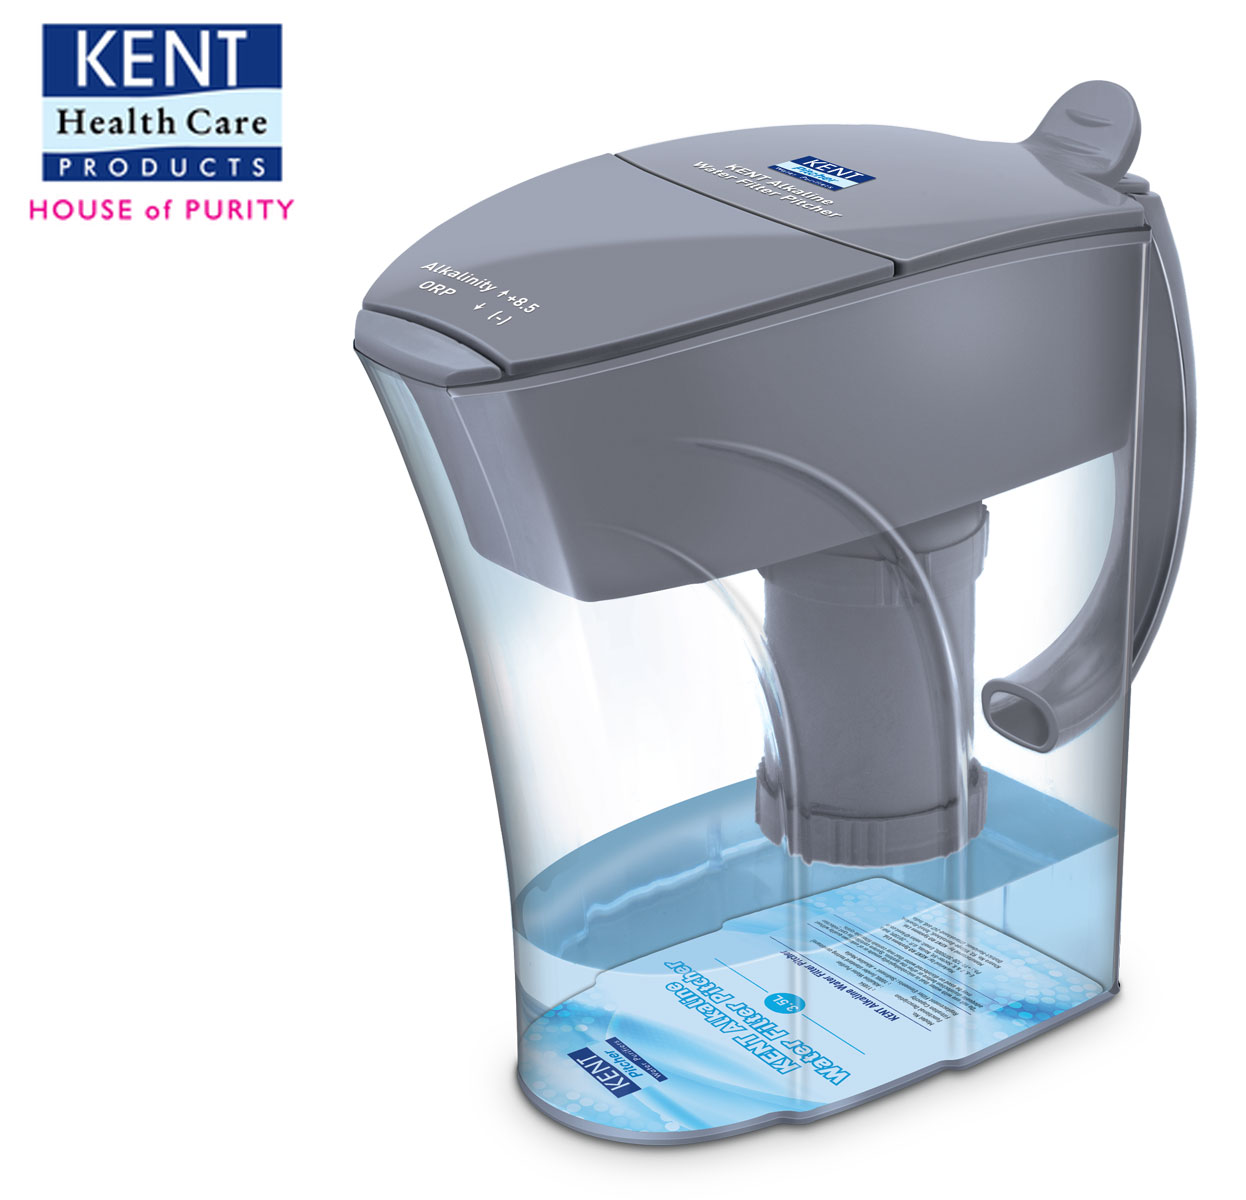 Kent launches Alkaline water Pitcher, new-product which converts drinking water into alkaline water